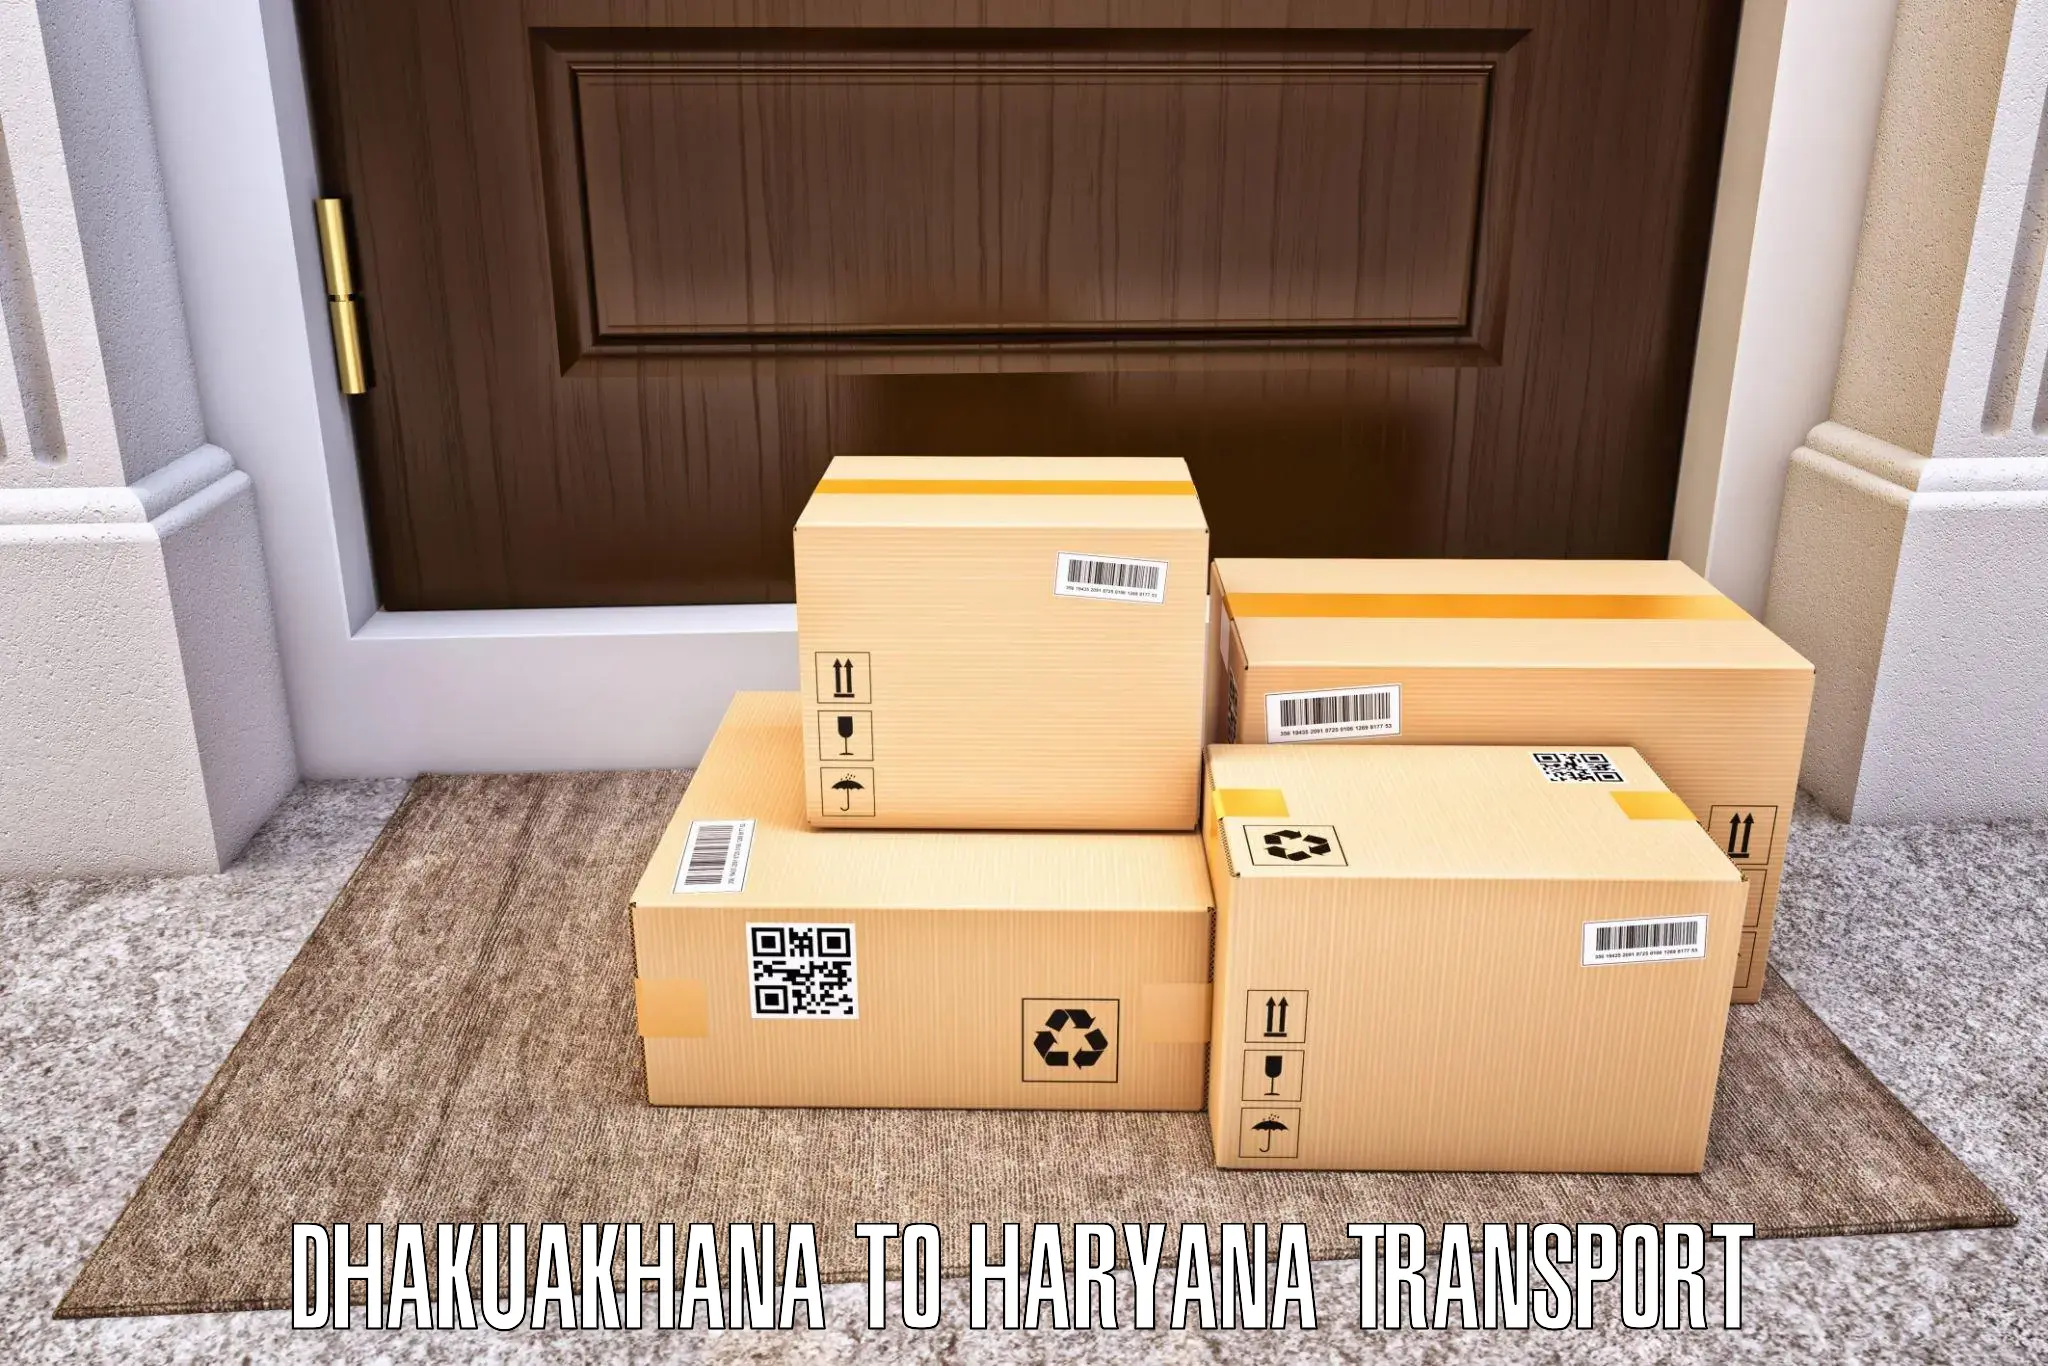 Vehicle transport services in Dhakuakhana to NCR Haryana